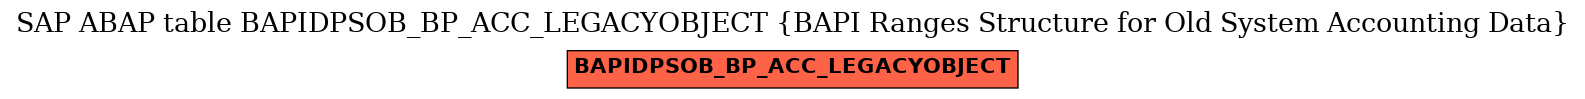 E-R Diagram for table BAPIDPSOB_BP_ACC_LEGACYOBJECT (BAPI Ranges Structure for Old System Accounting Data)